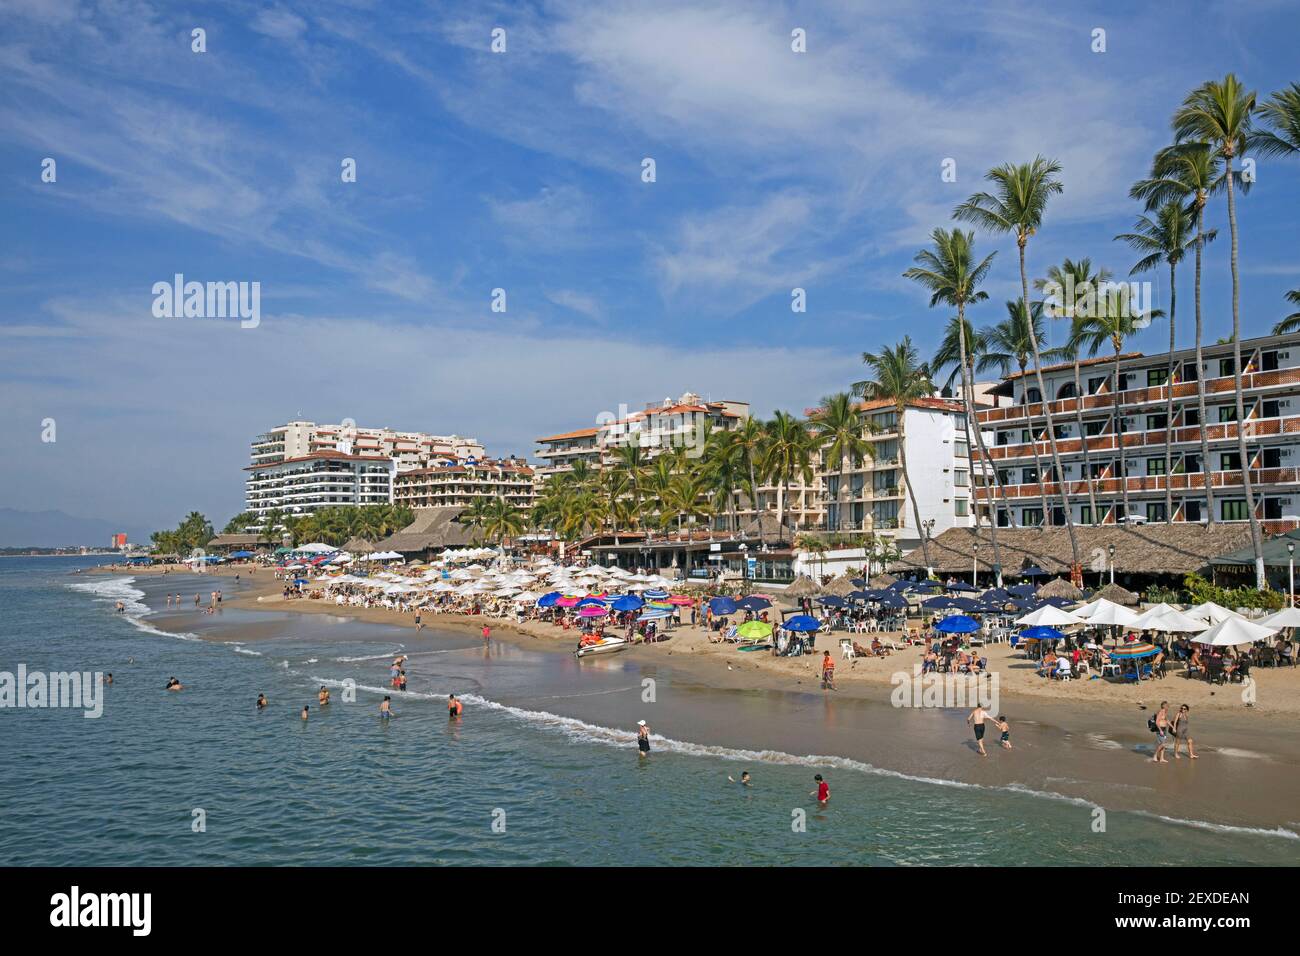 Sunbathers and hotels at Puerto Vallarta, Mexican beach resort city situated on the Pacific Ocean's Bahía de Banderas, Jalisco, Mexico Stock Photo